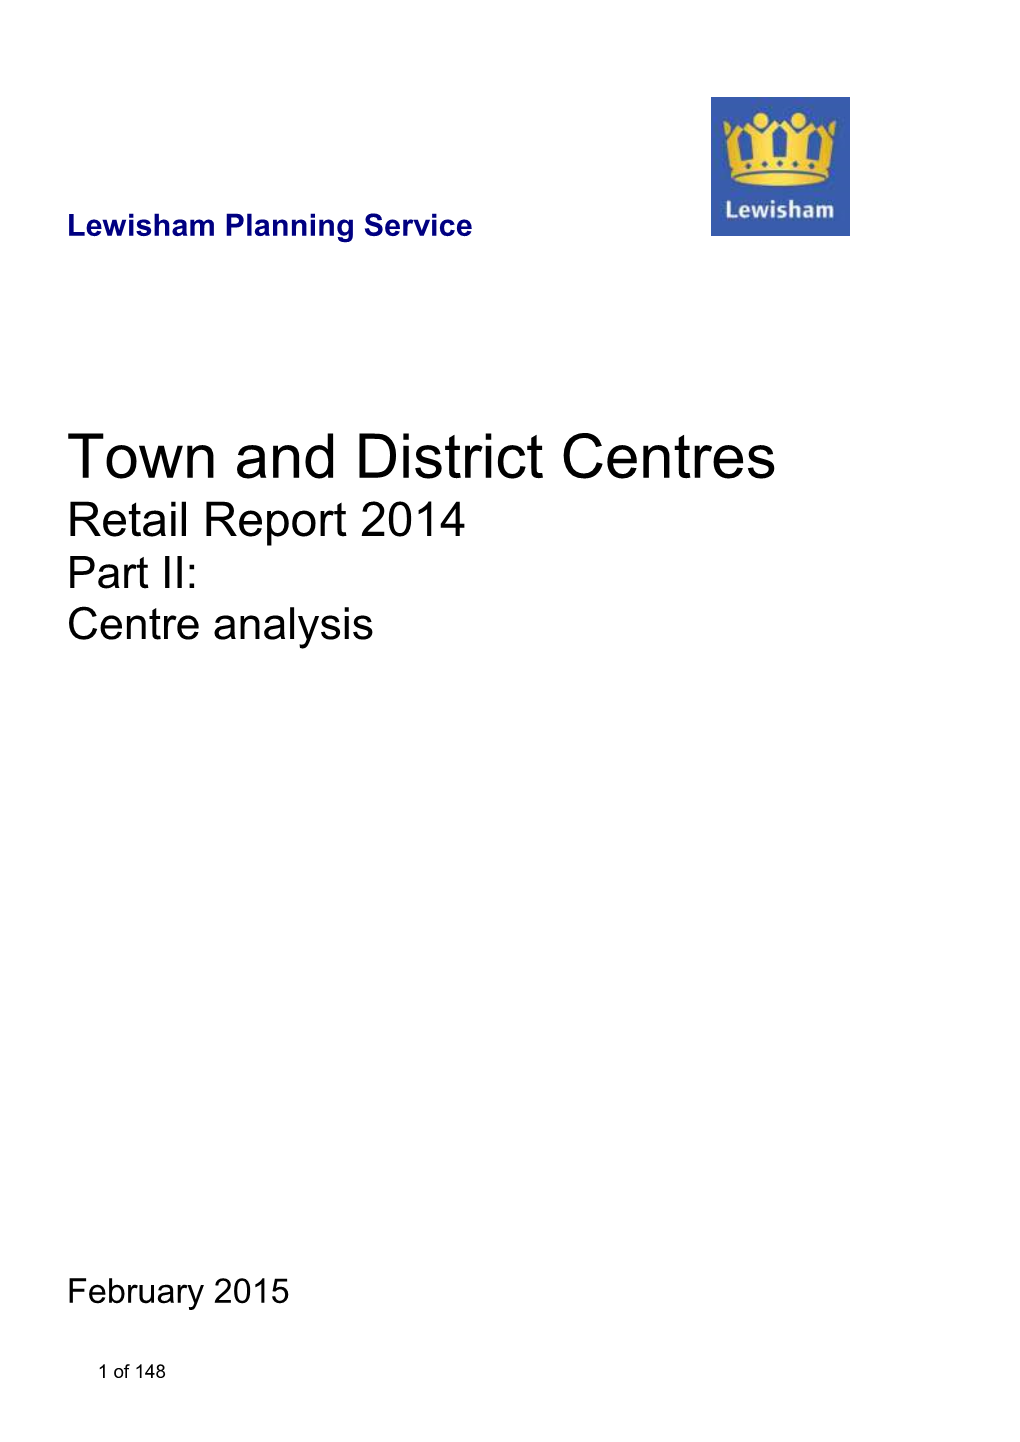 Major Town and District Centre Retail Report Part II Lewisham Centre: Full List of Units